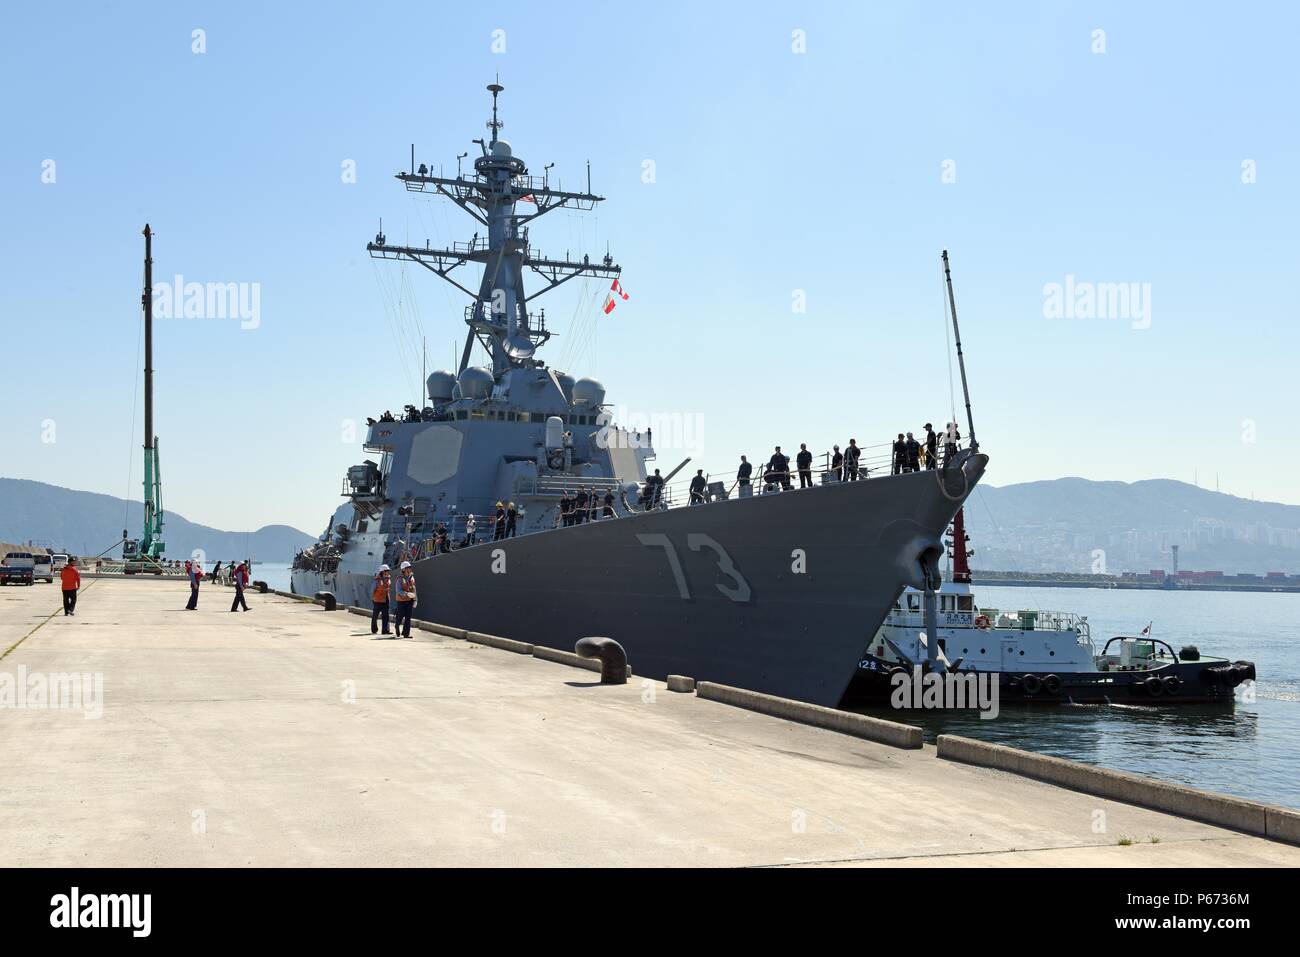 160517-N-WT427-076  BUSAN, Republic of Korea (May 17,  2016) USS Decatur (DDG 73) arrives at the Republic of Korea (ROK) Fleet headquarters in Busan for a planning conference and routine port visit. Decatur, along with destroyers USS Momsen (DDG 92) and USS Spruance (DDG 111), are deployed as part of a U.S. 3rd Fleet Pacific Surface Action Group (PAC SAG) under Destroyer Squadron (CDS) 31. (U.S. Navy photo by Mass Communication Specialist 3rd Class Jermaine M. Ralliford/RELEASED) Stock Photo